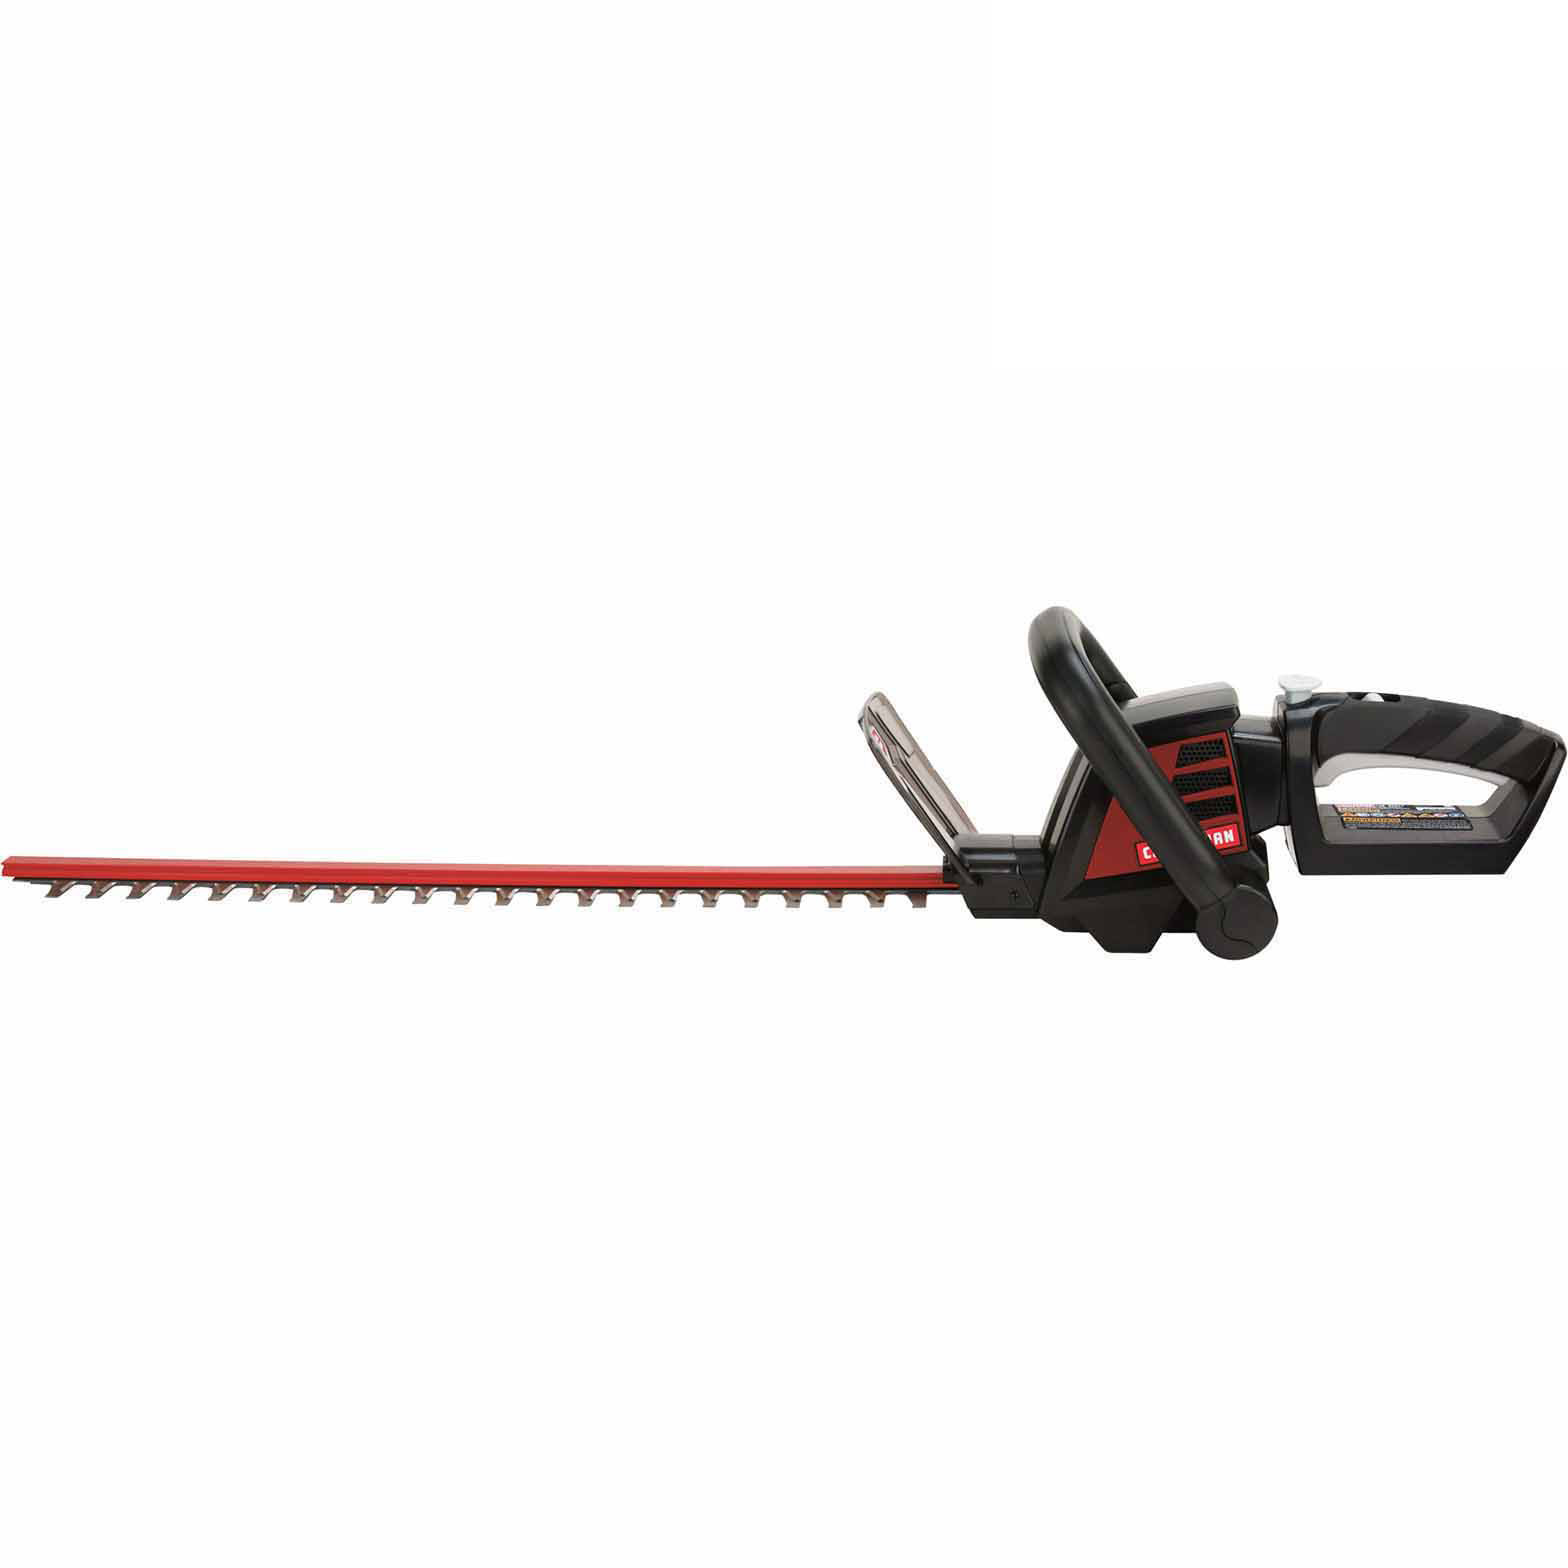 Craftsman 2200001 40V Cordless Hedge Trimmer - Battery and Charger sold separately